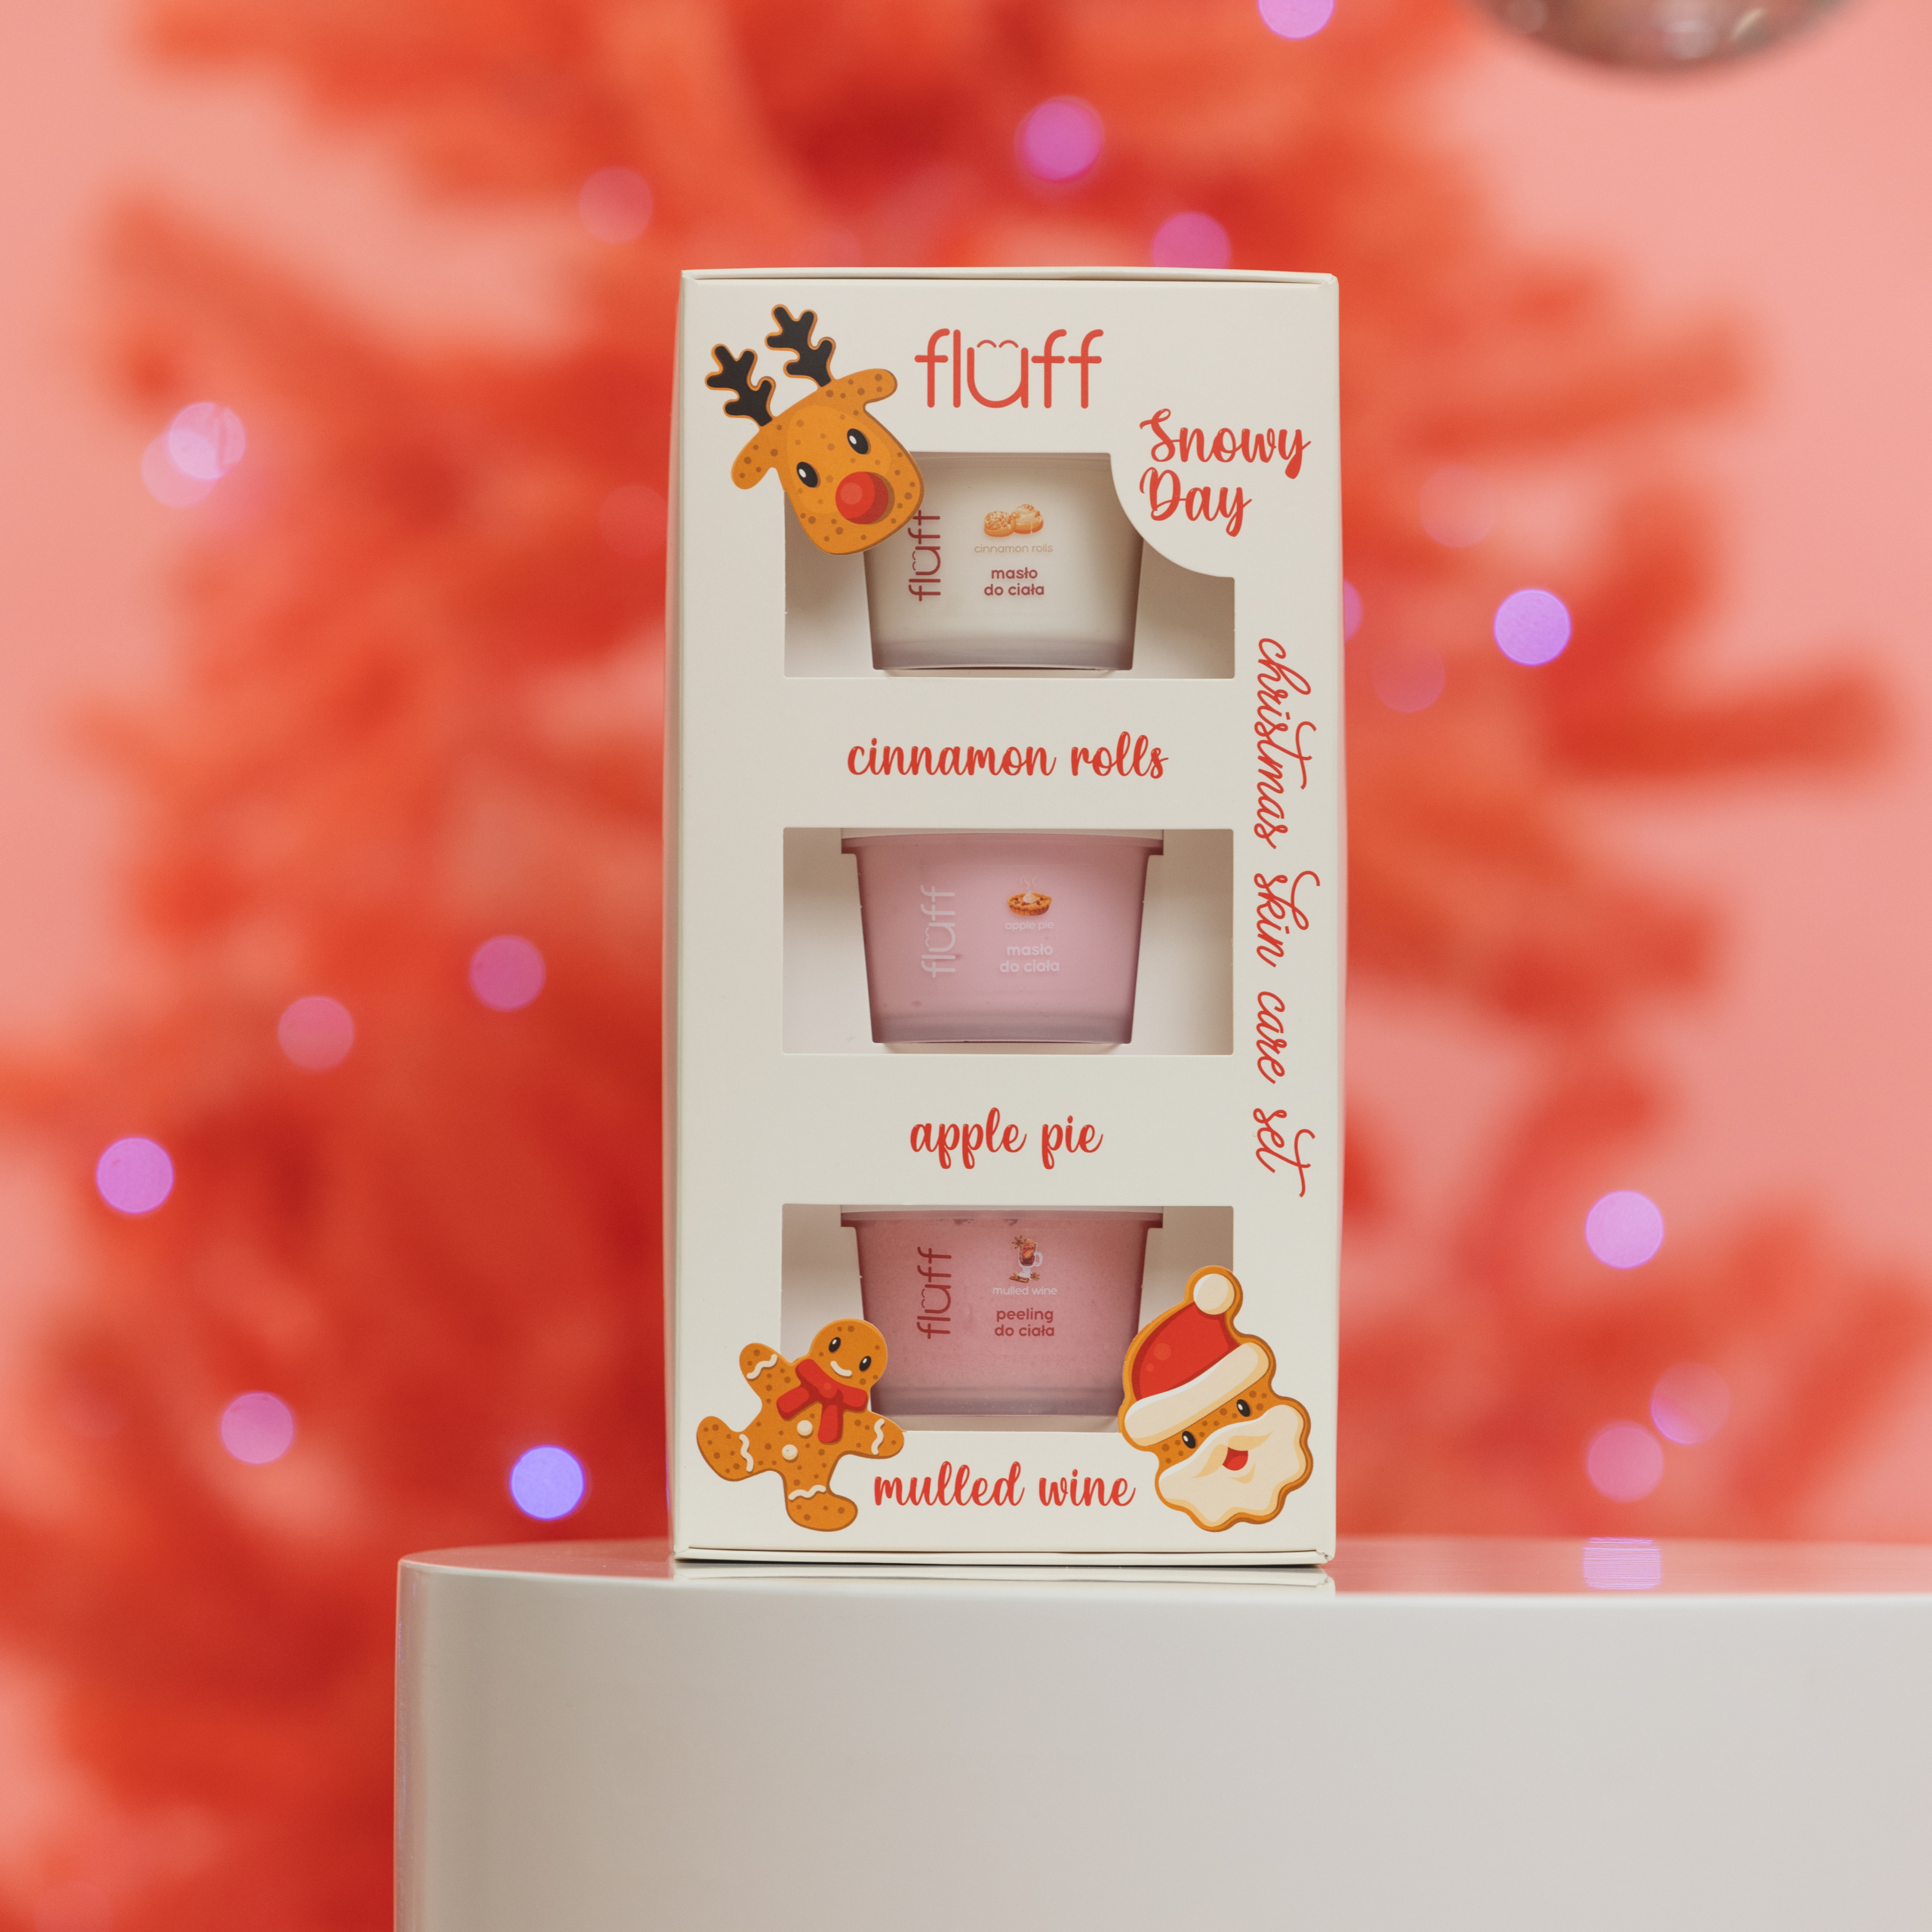 Fluff Snowy Day Christmas Skin Care Set